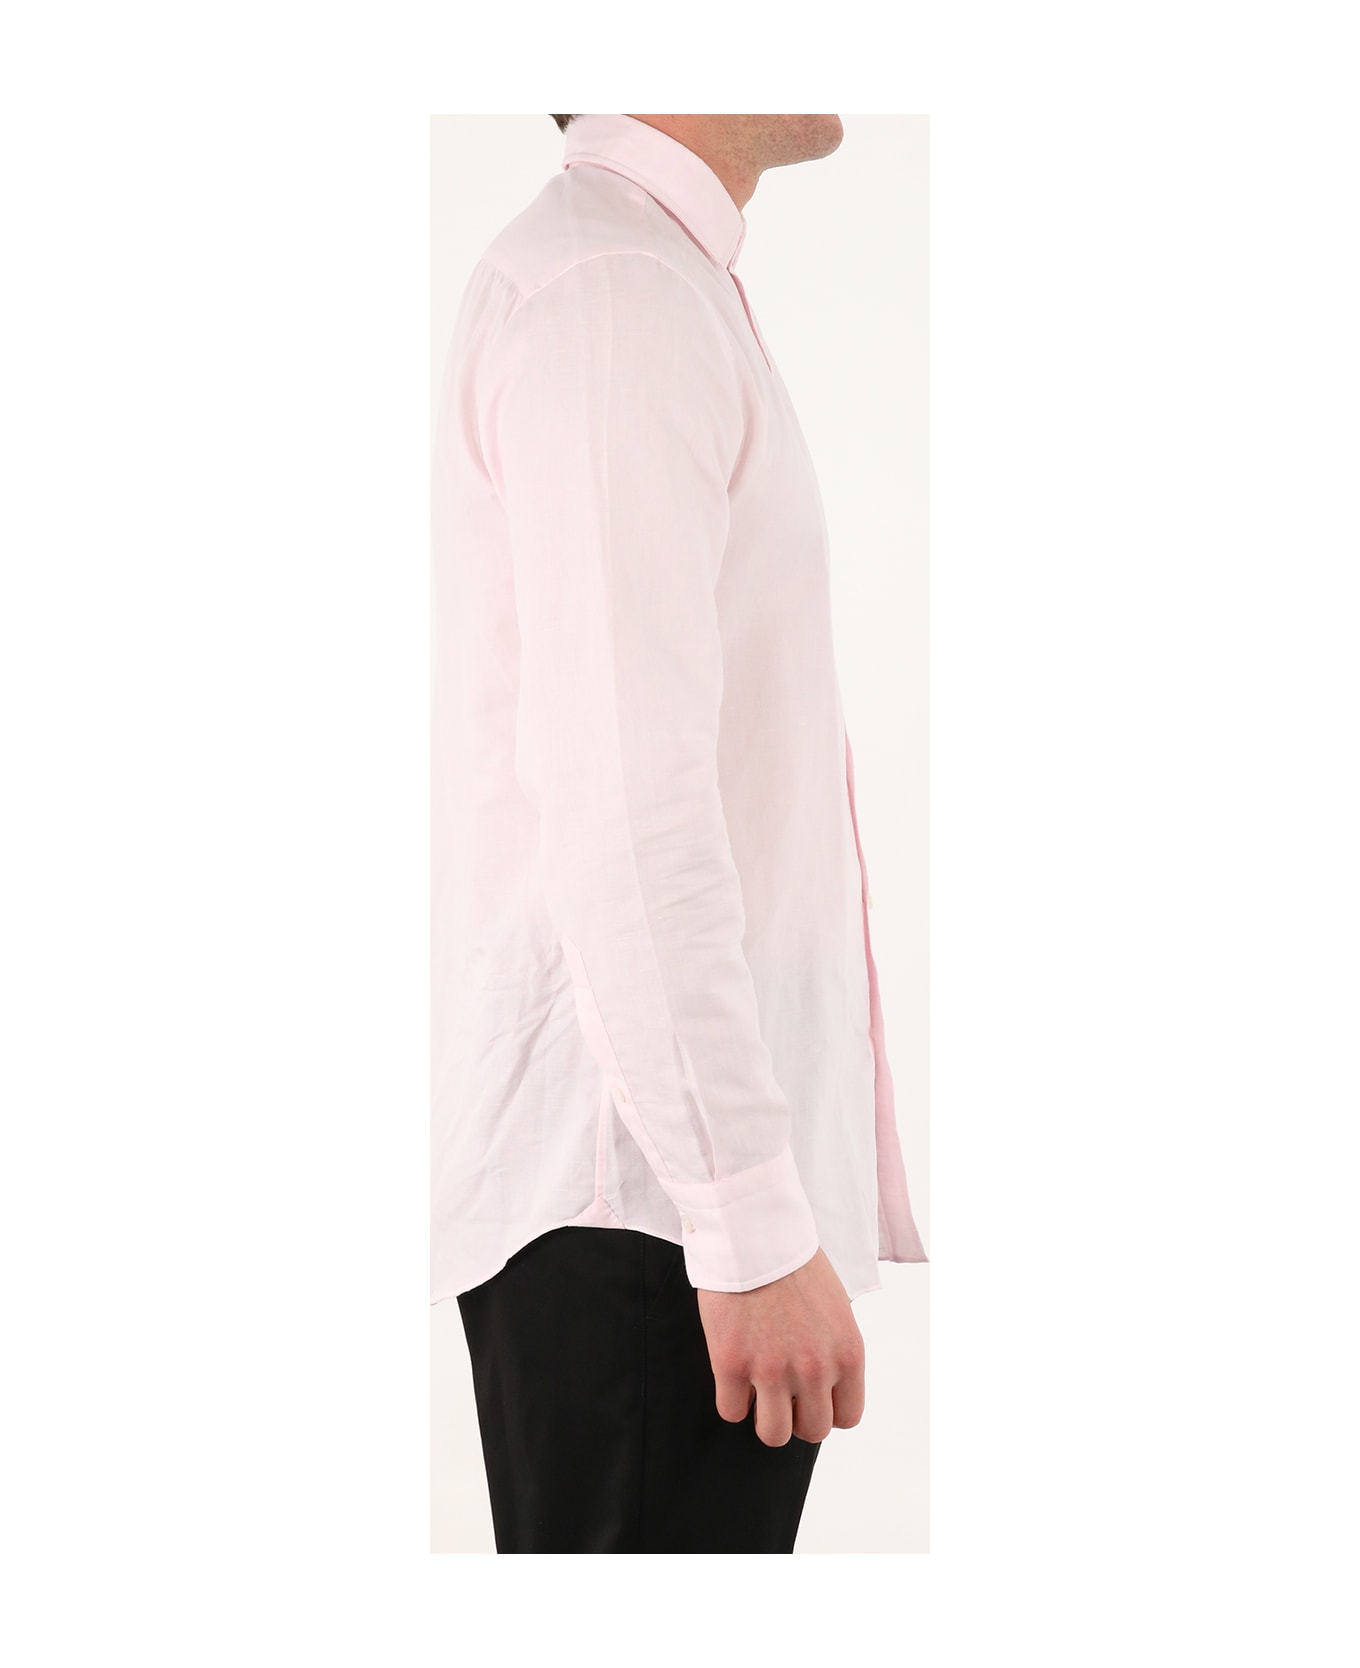 Salvatore Piccolo Pink Shirt With Open Collar - PINK シャツ